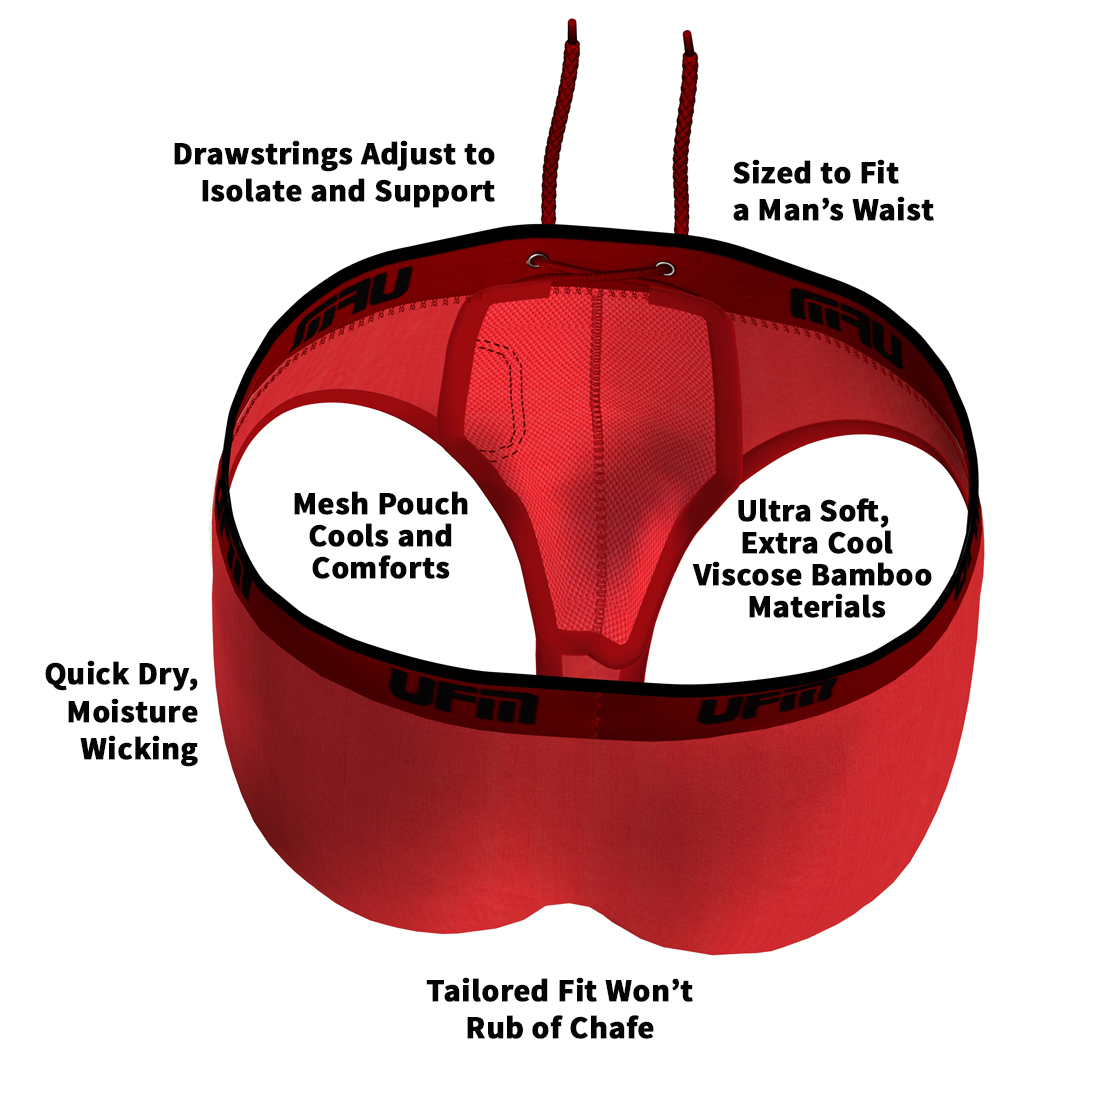 Athletic Briefs Inside the pouch